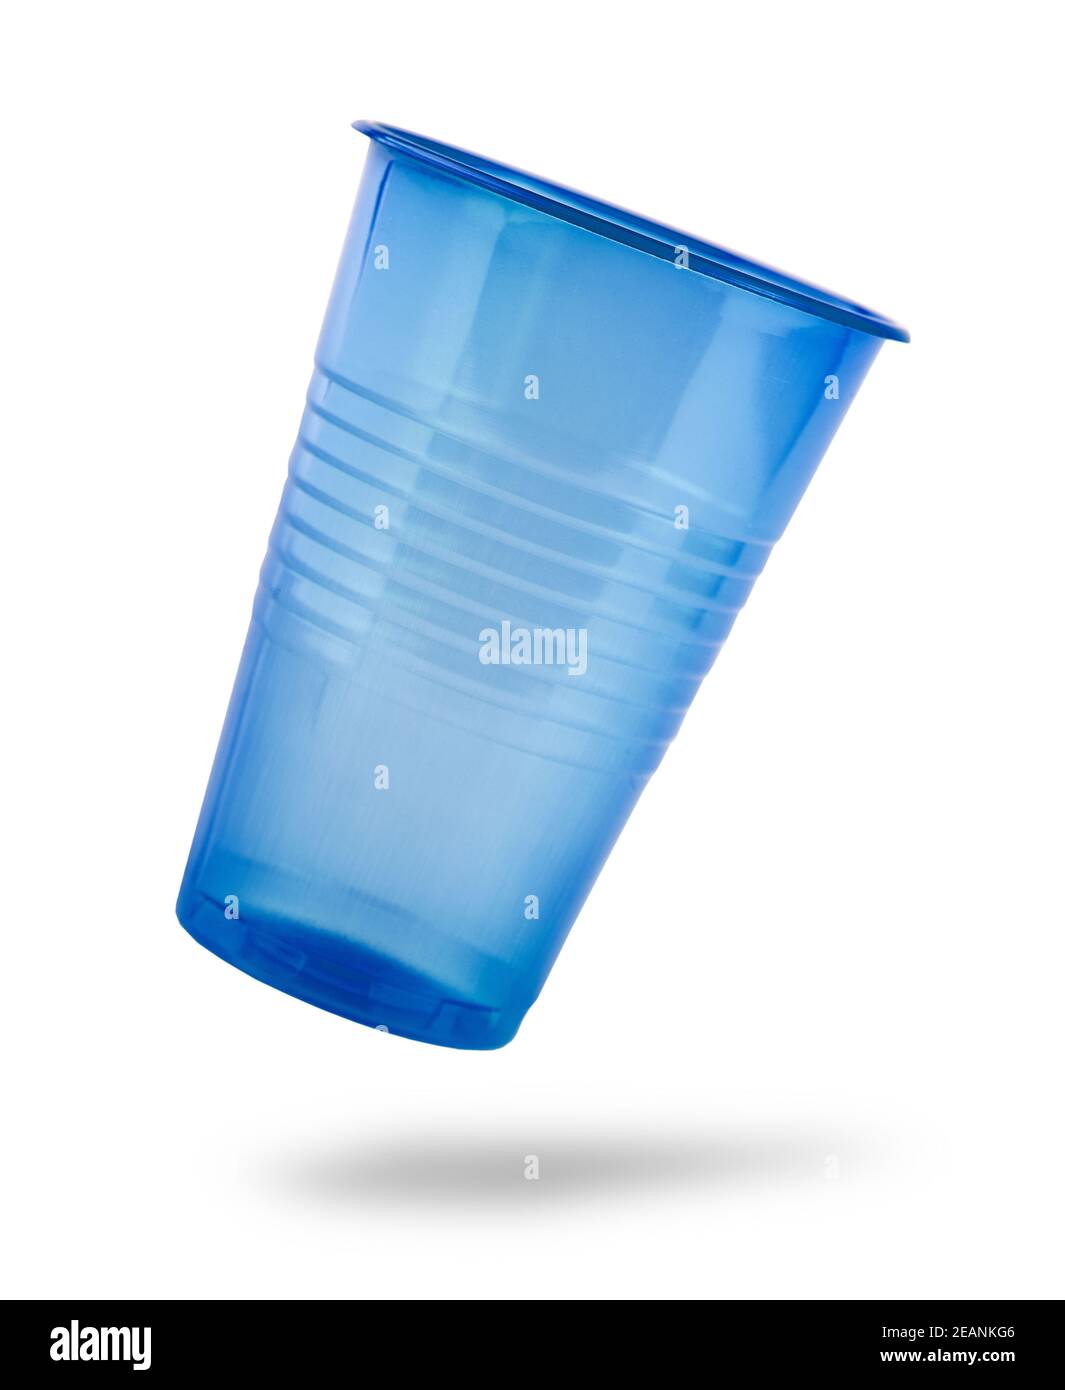 https://c8.alamy.com/comp/2EANKG6/the-blue-plastic-cup-isolated-on-a-white-background-2EANKG6.jpg